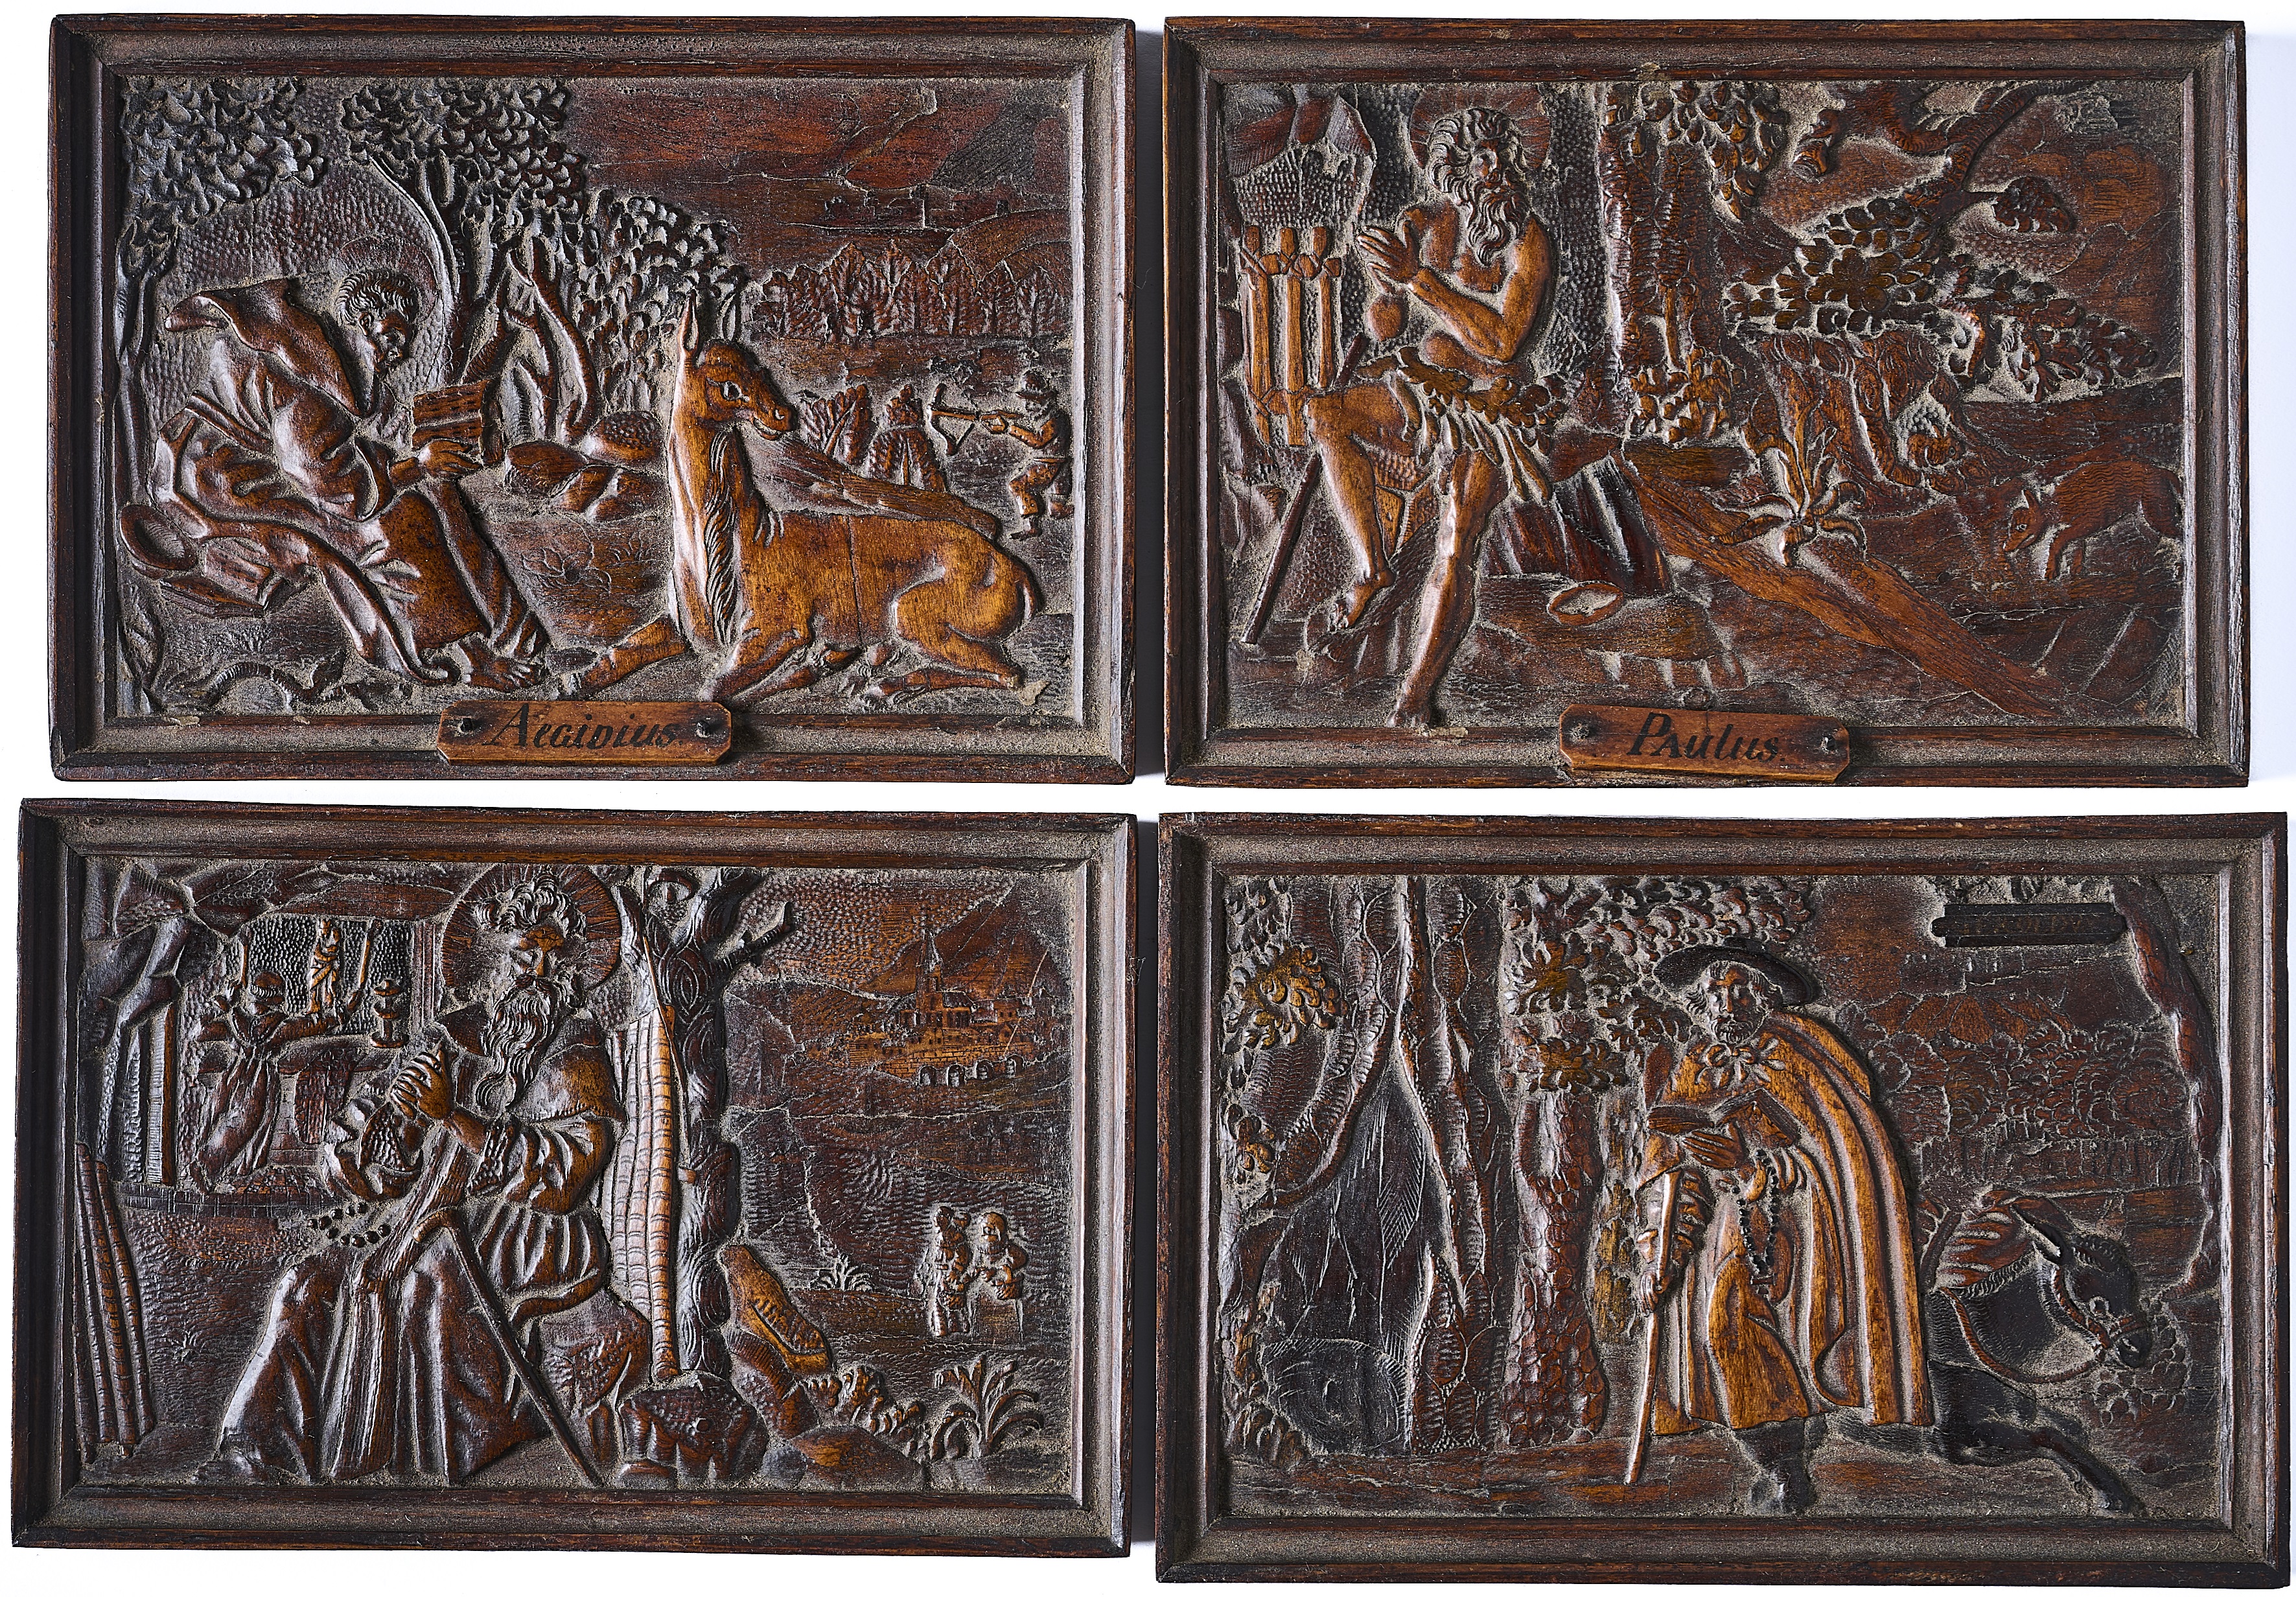 A GROUP OF FOUR WOOD RELIEF PANELS, PROBABLY BOHEMIAN, EGER, MID 17TH CENTURY